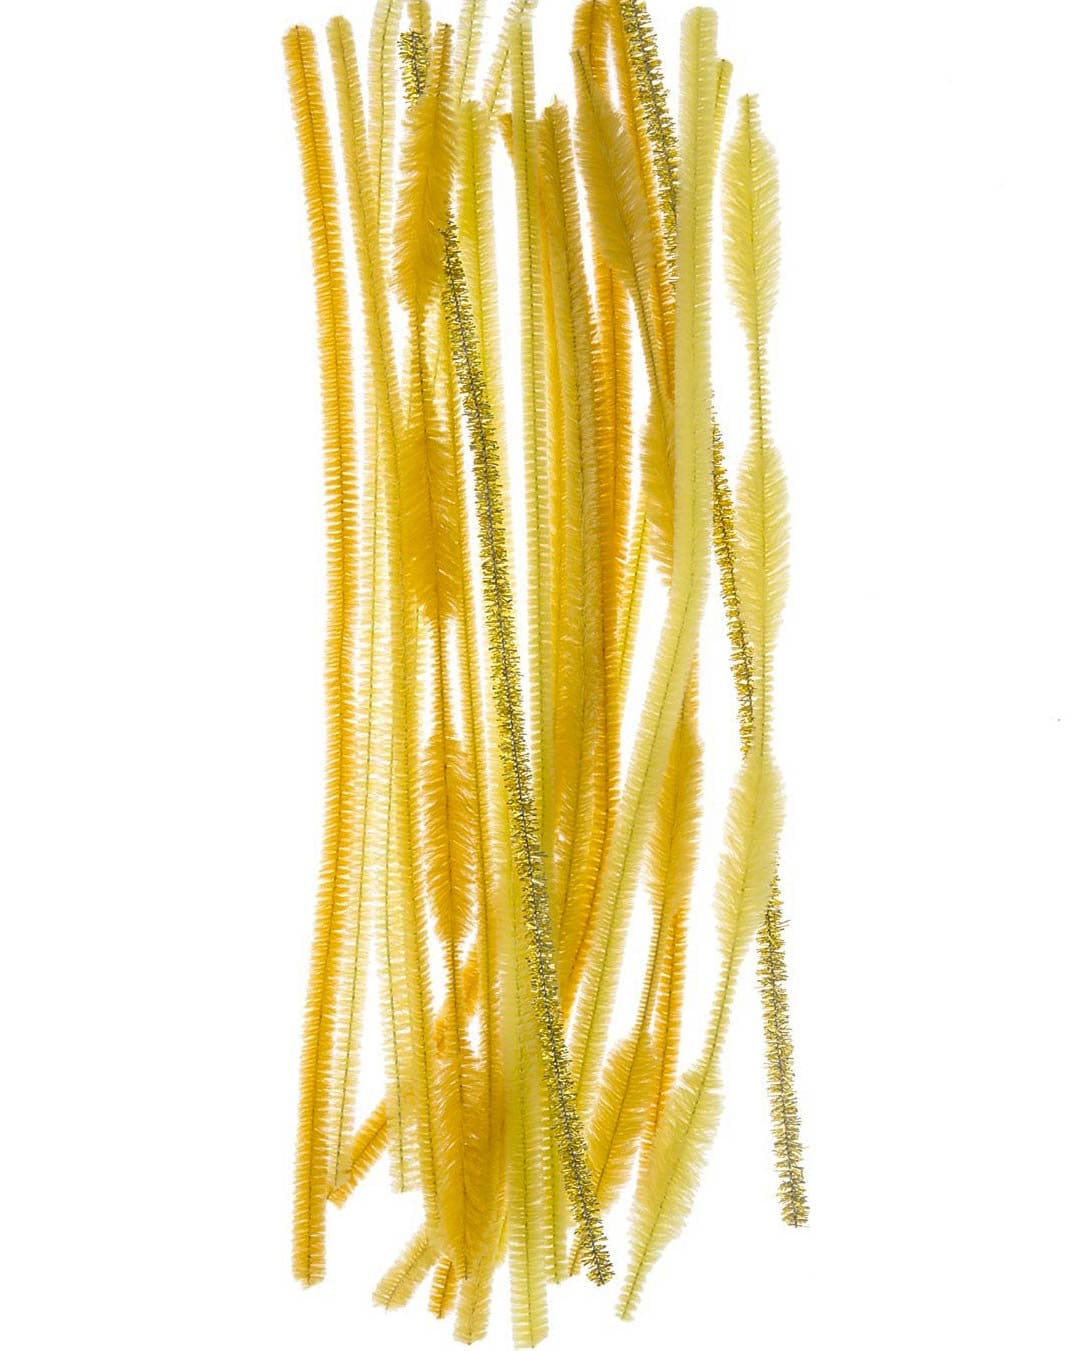 Yellow Chenille Craft Stems, Assorted Yellow Pipe Cleaners 20